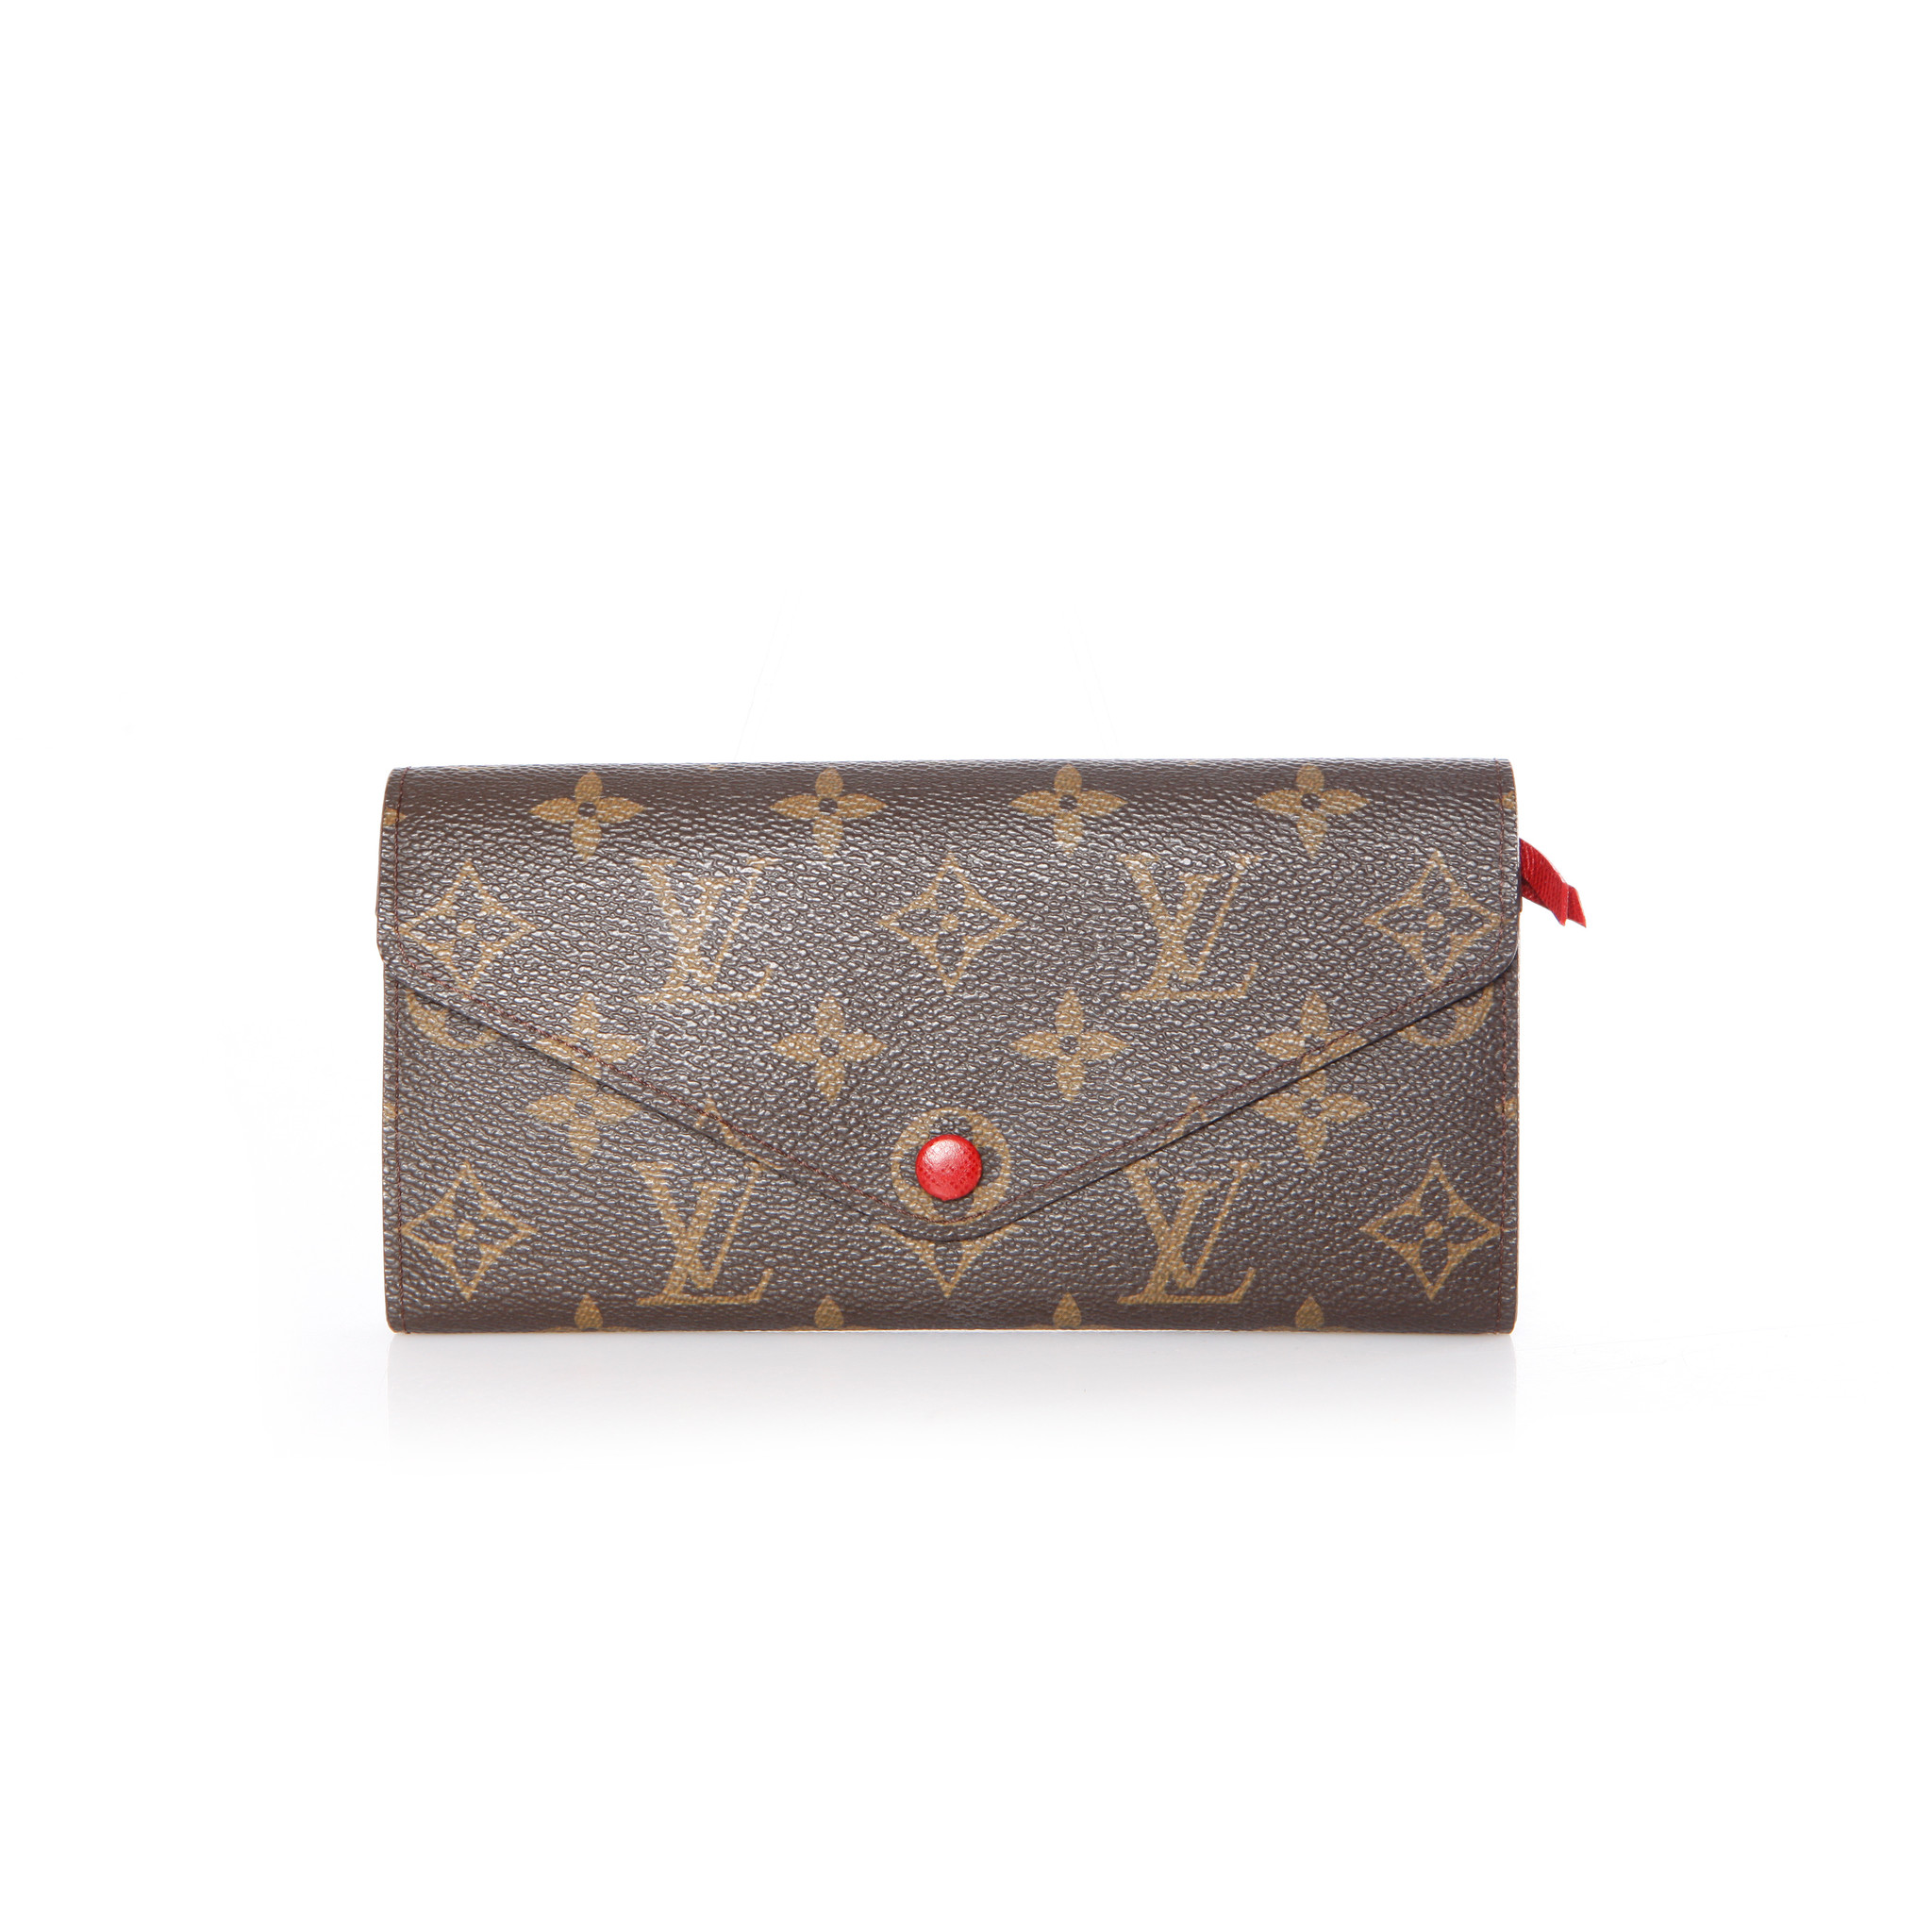 Buy Louis Vuitton monogram LOUIS VUITTON Portefeuille Joy Monogram M60211  Trifold Wallet Brown / 083449 [Used] from Japan - Buy authentic Plus  exclusive items from Japan